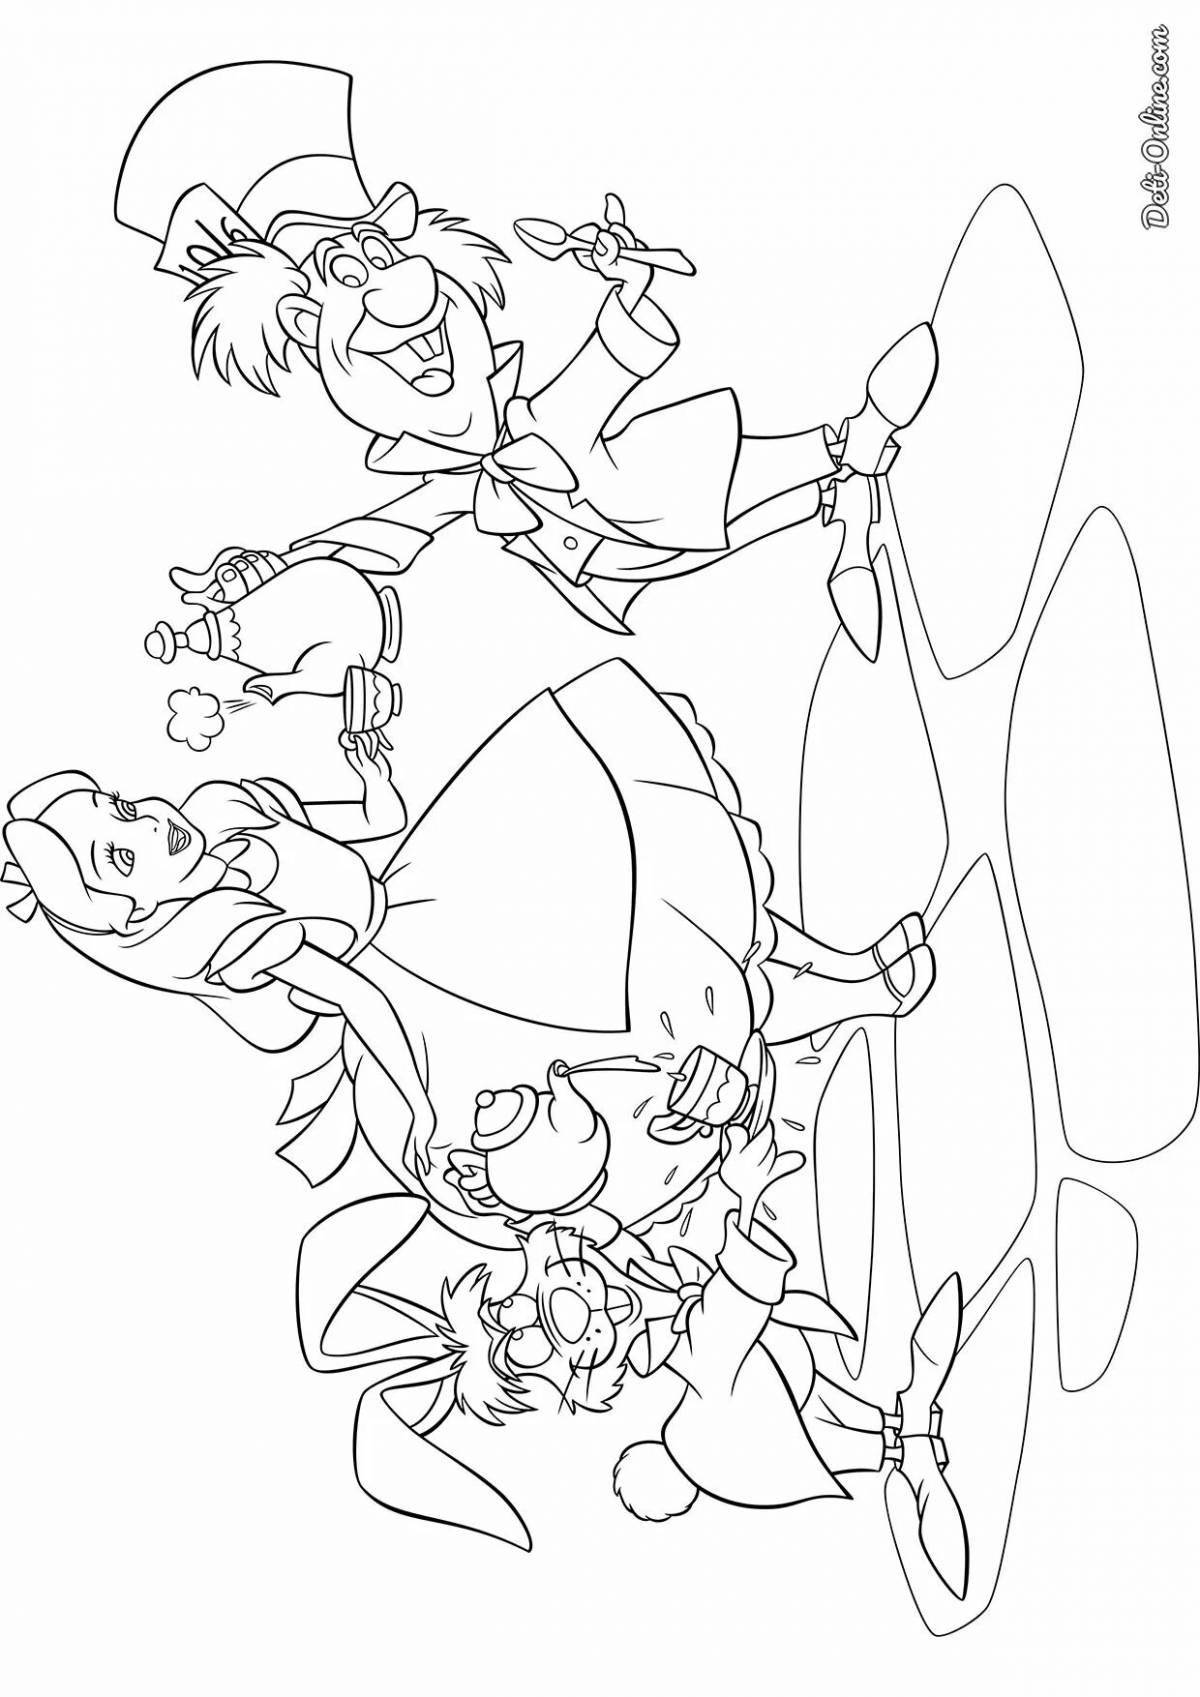 Coloring page stupid hatter